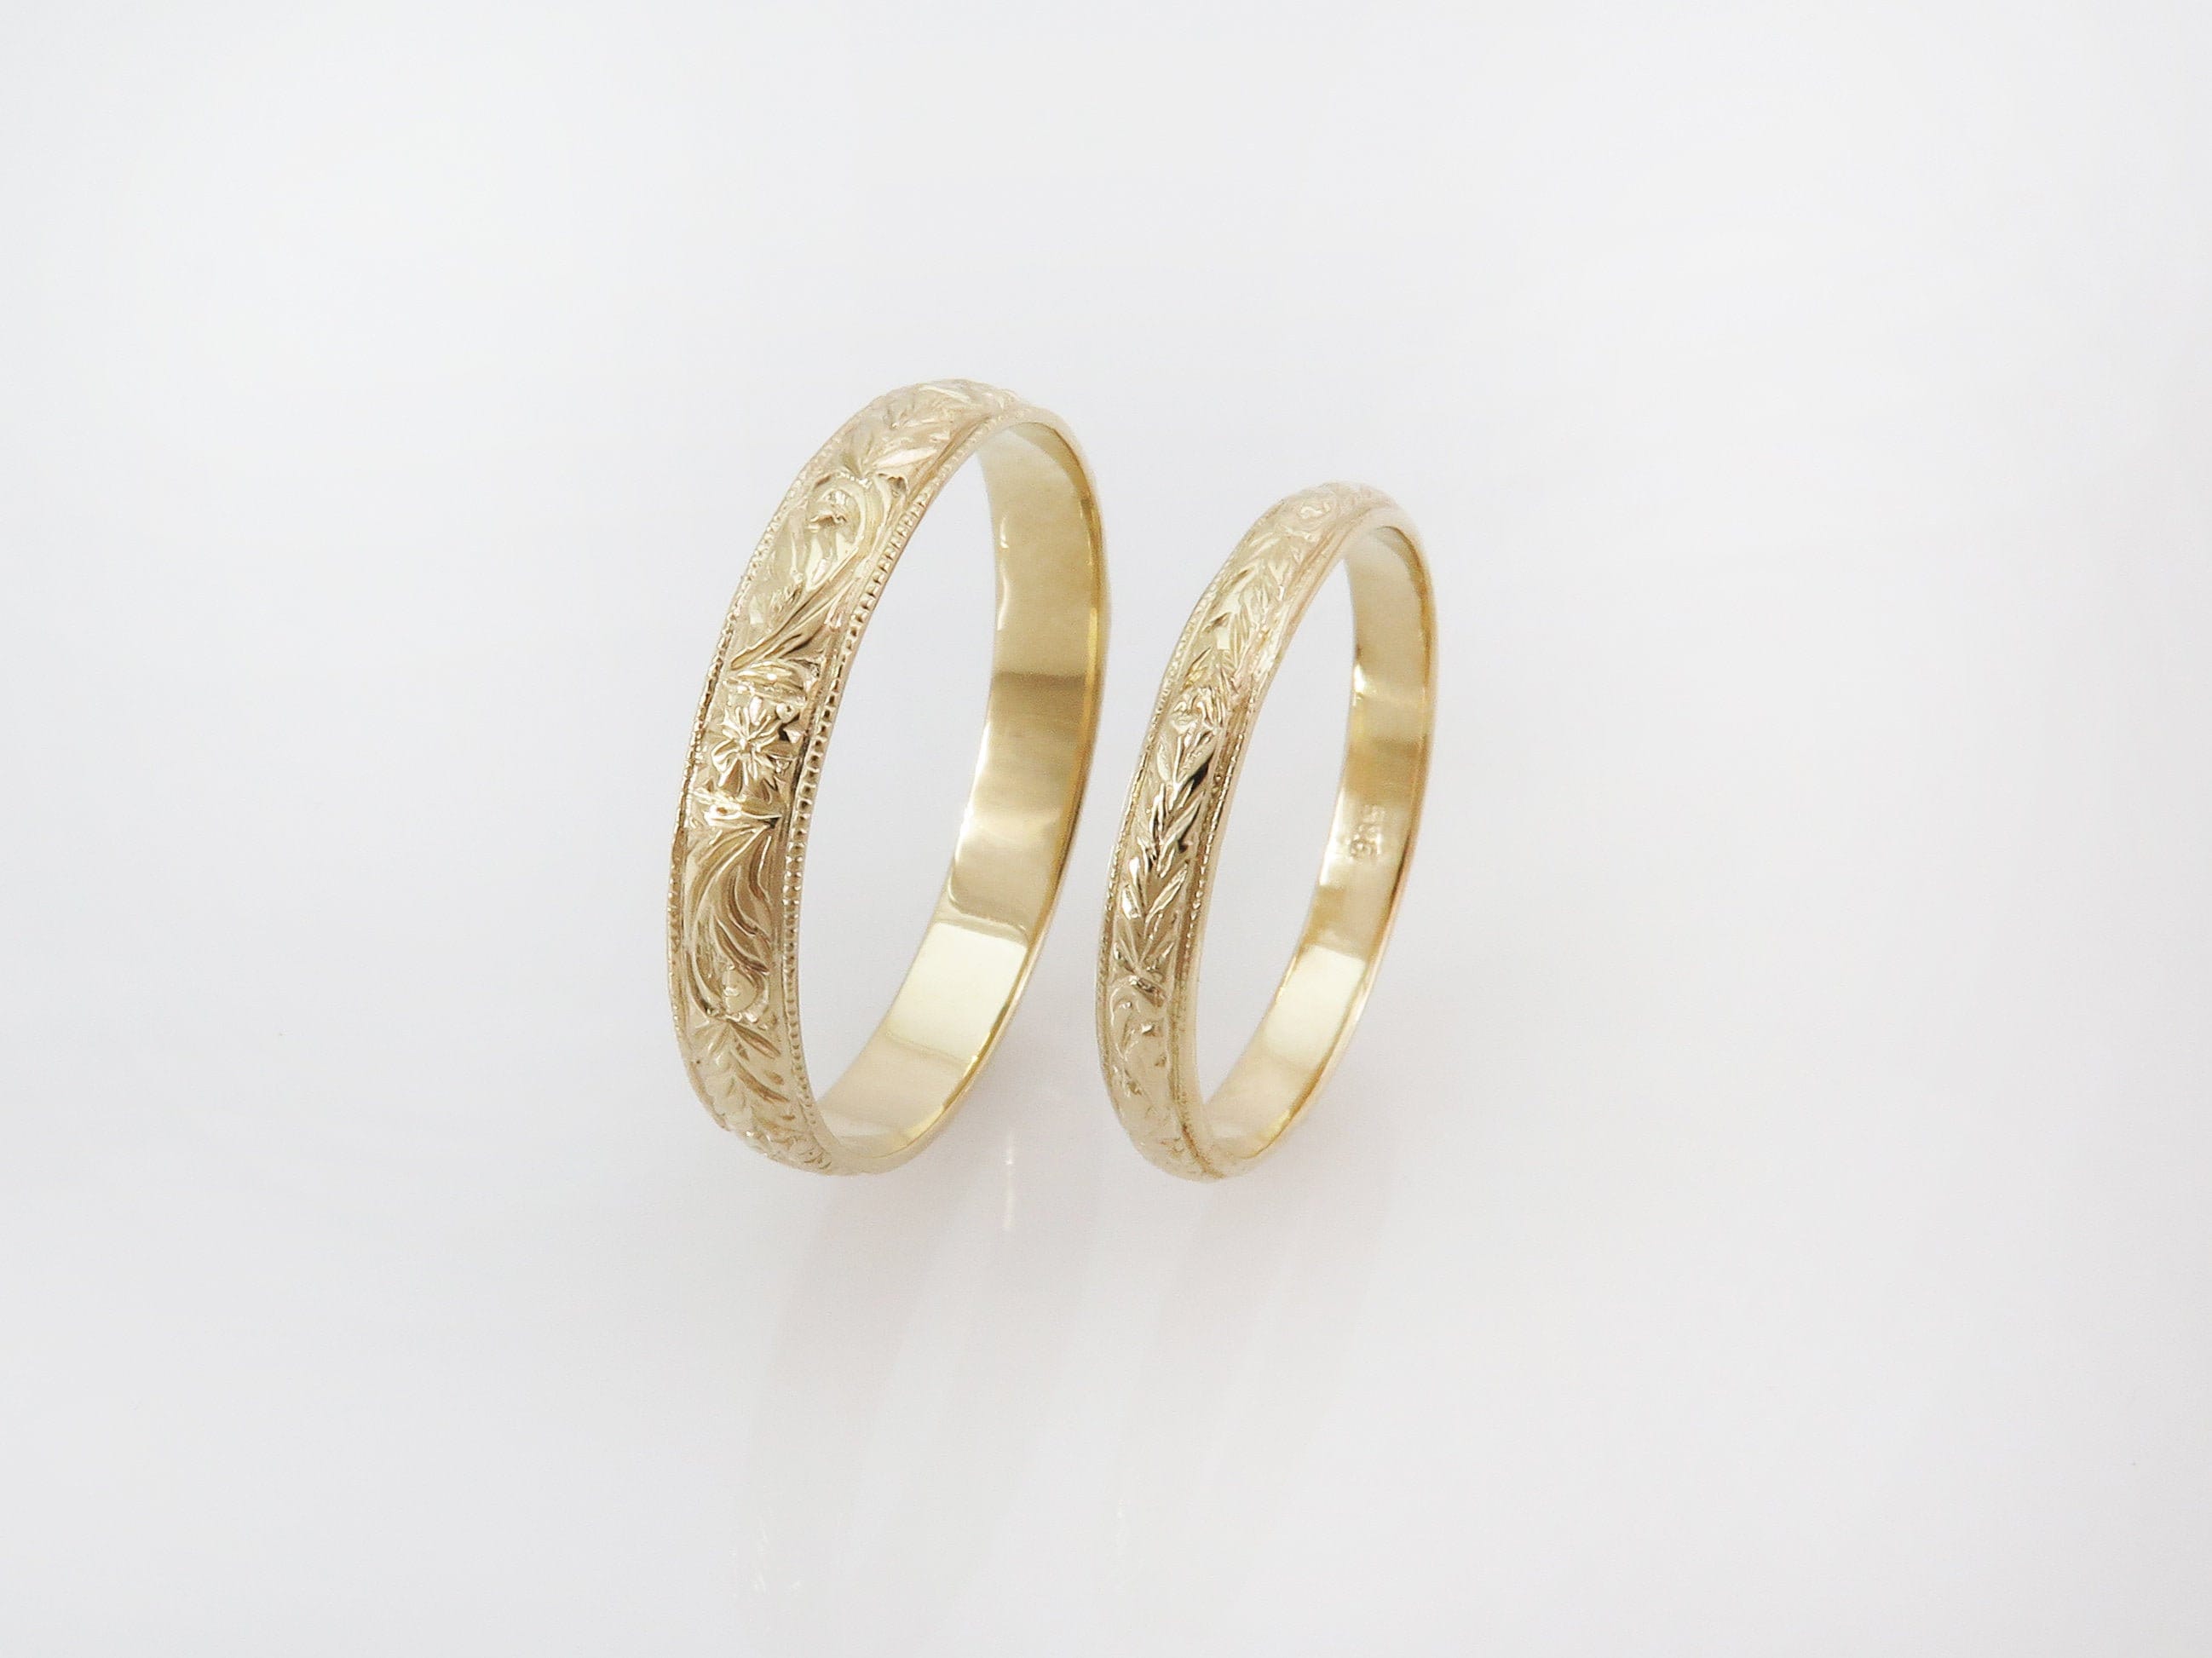 14k White and Yellow Gold His and Hers Matching Wedding Ring Set